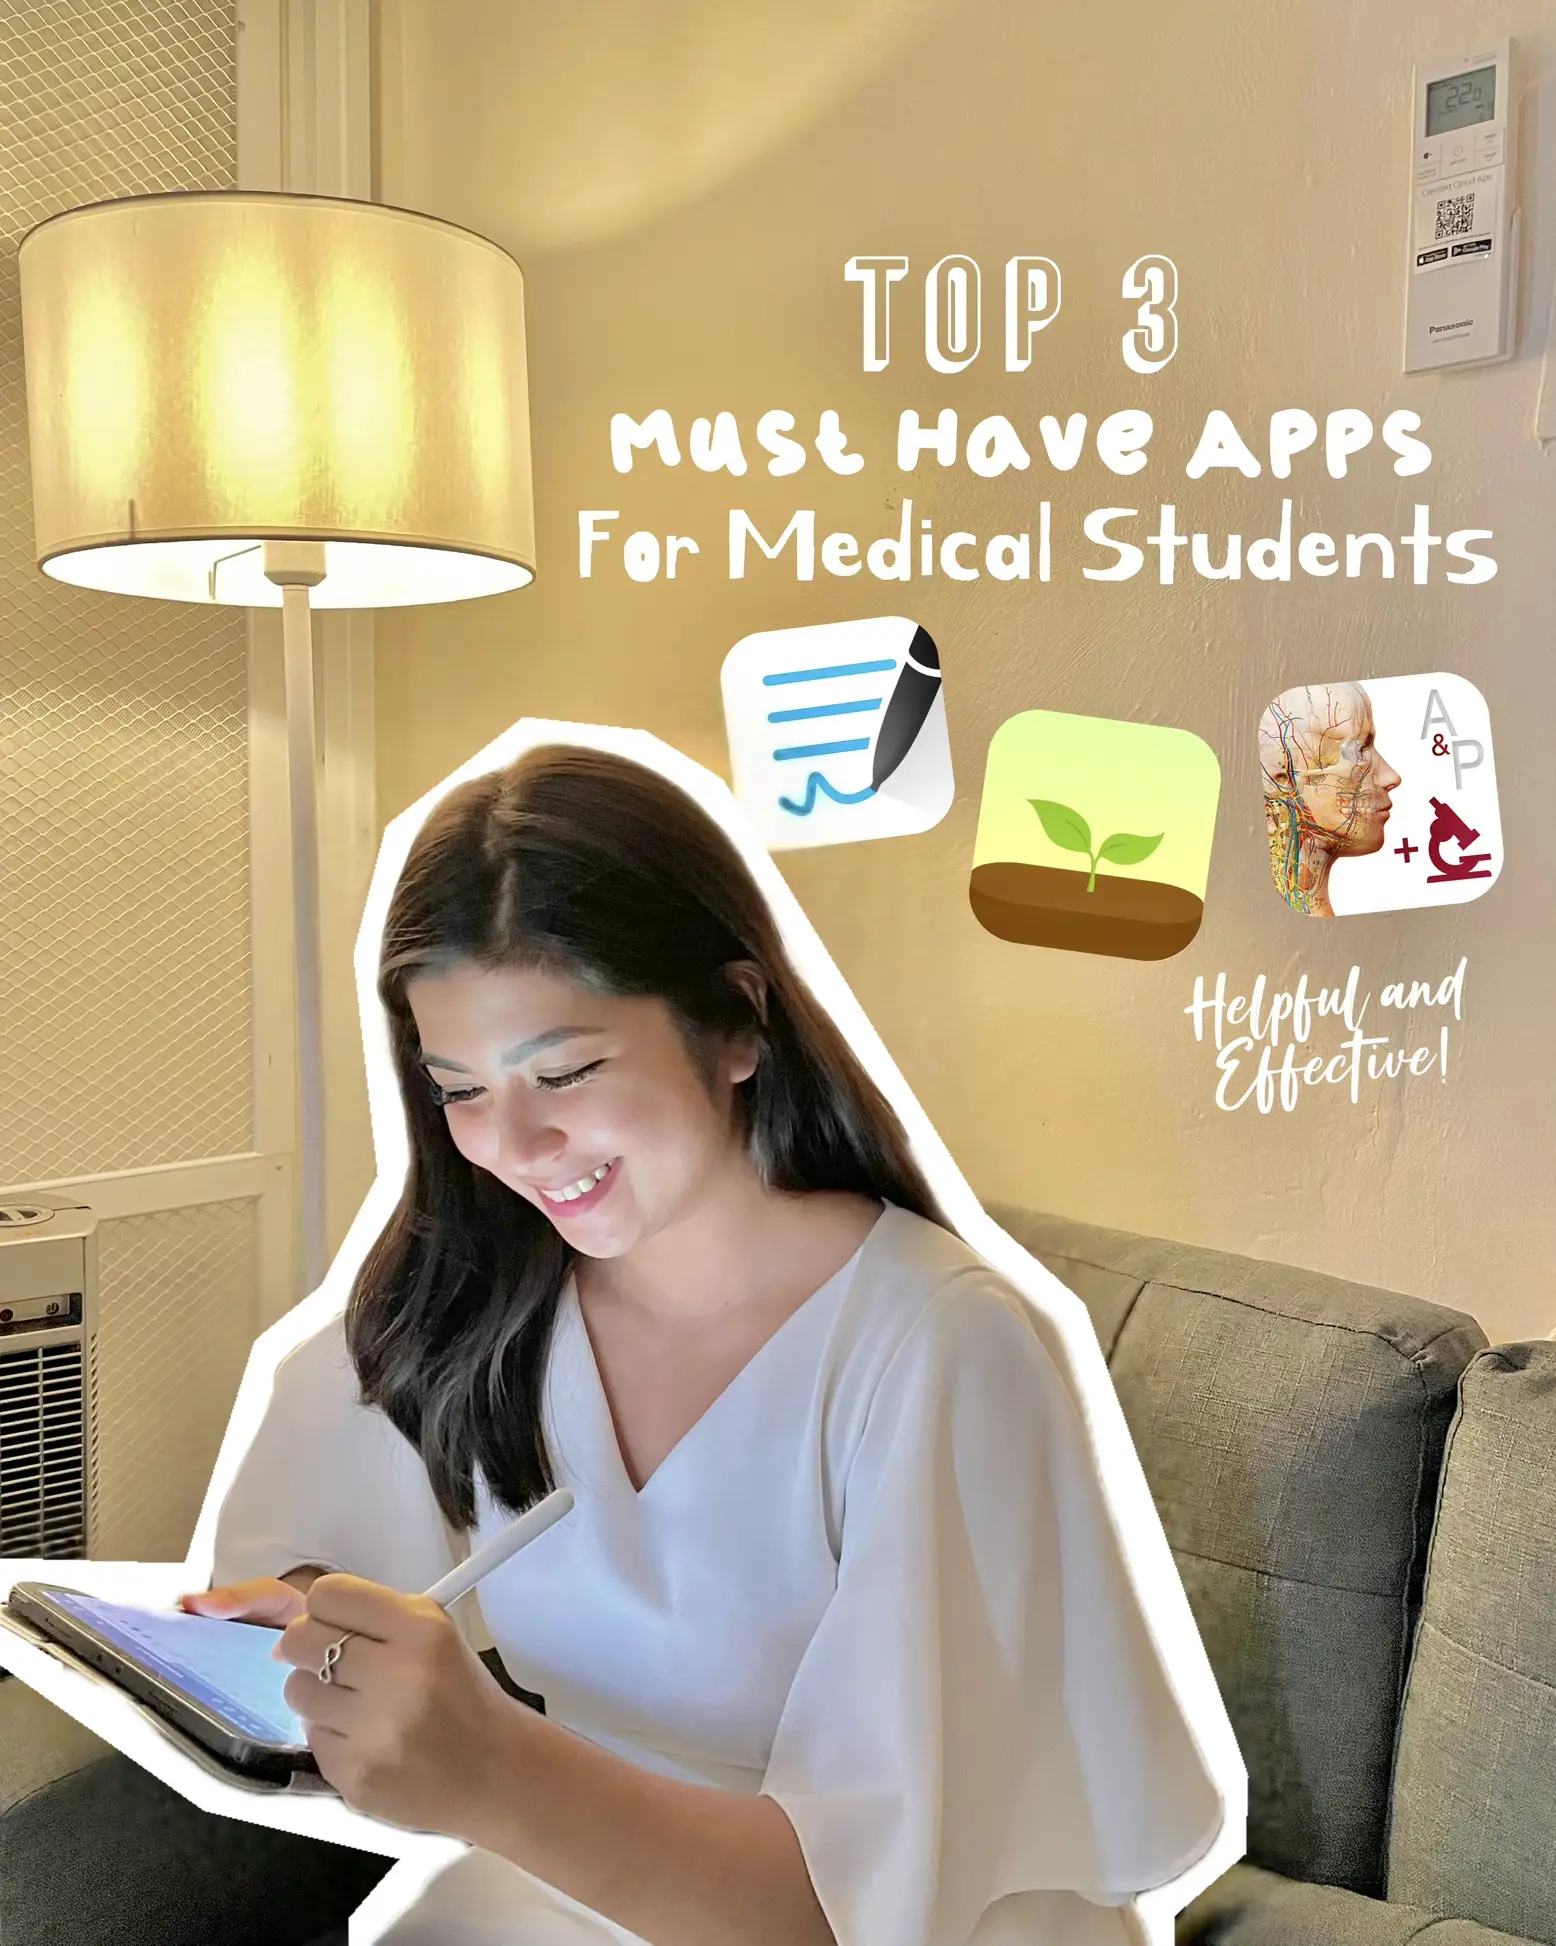 Top 3 Apps helpful for Medical Students📚📱 's images(0)